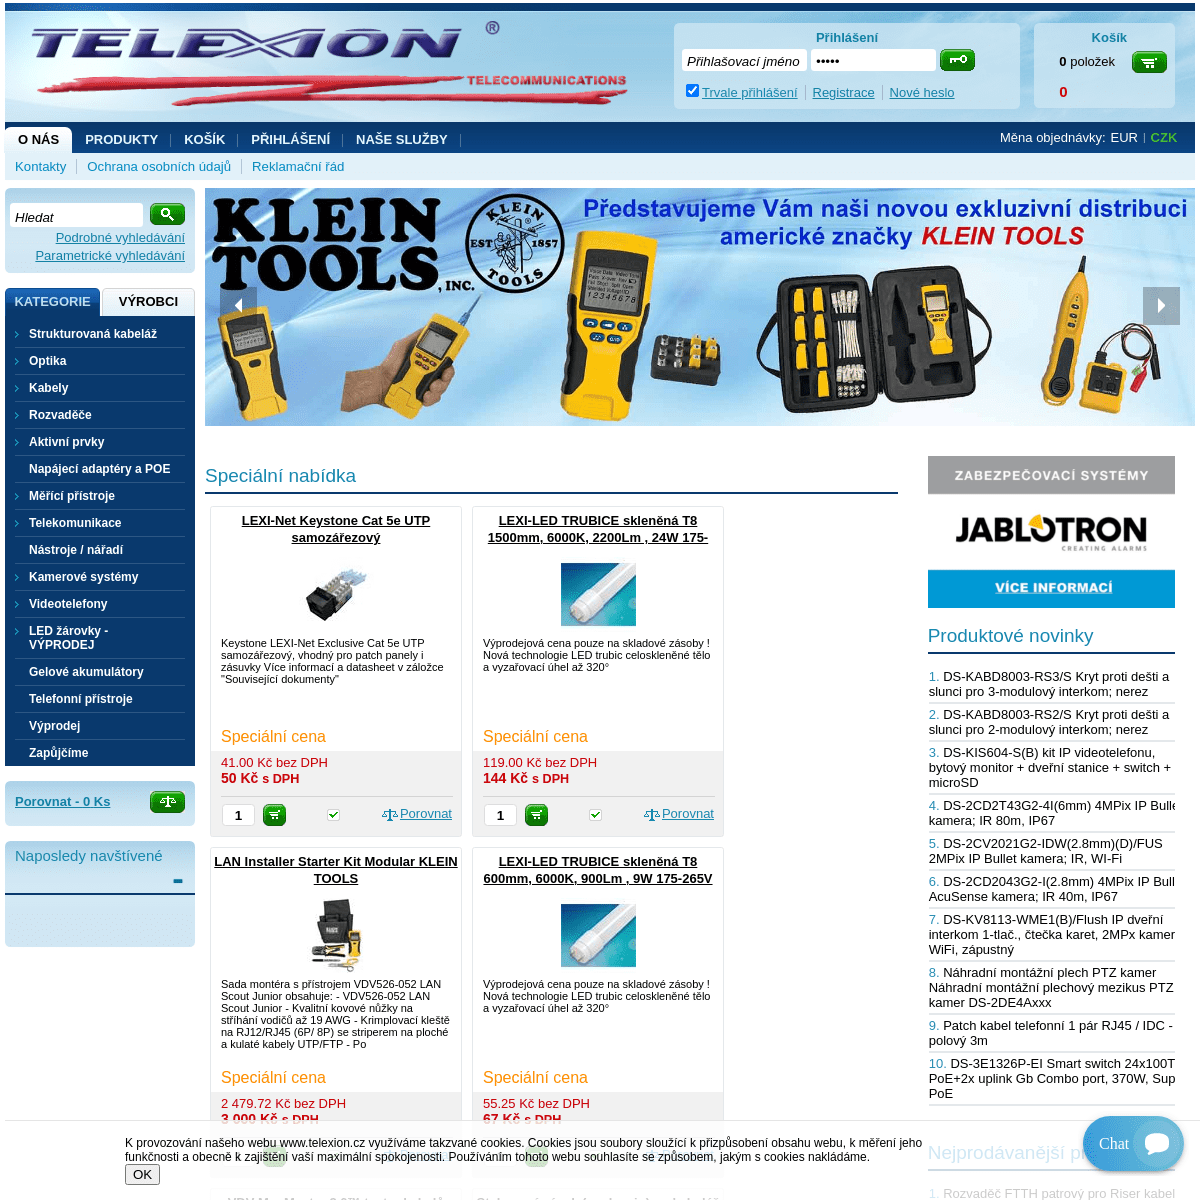 A complete backup of https://telexion.cz